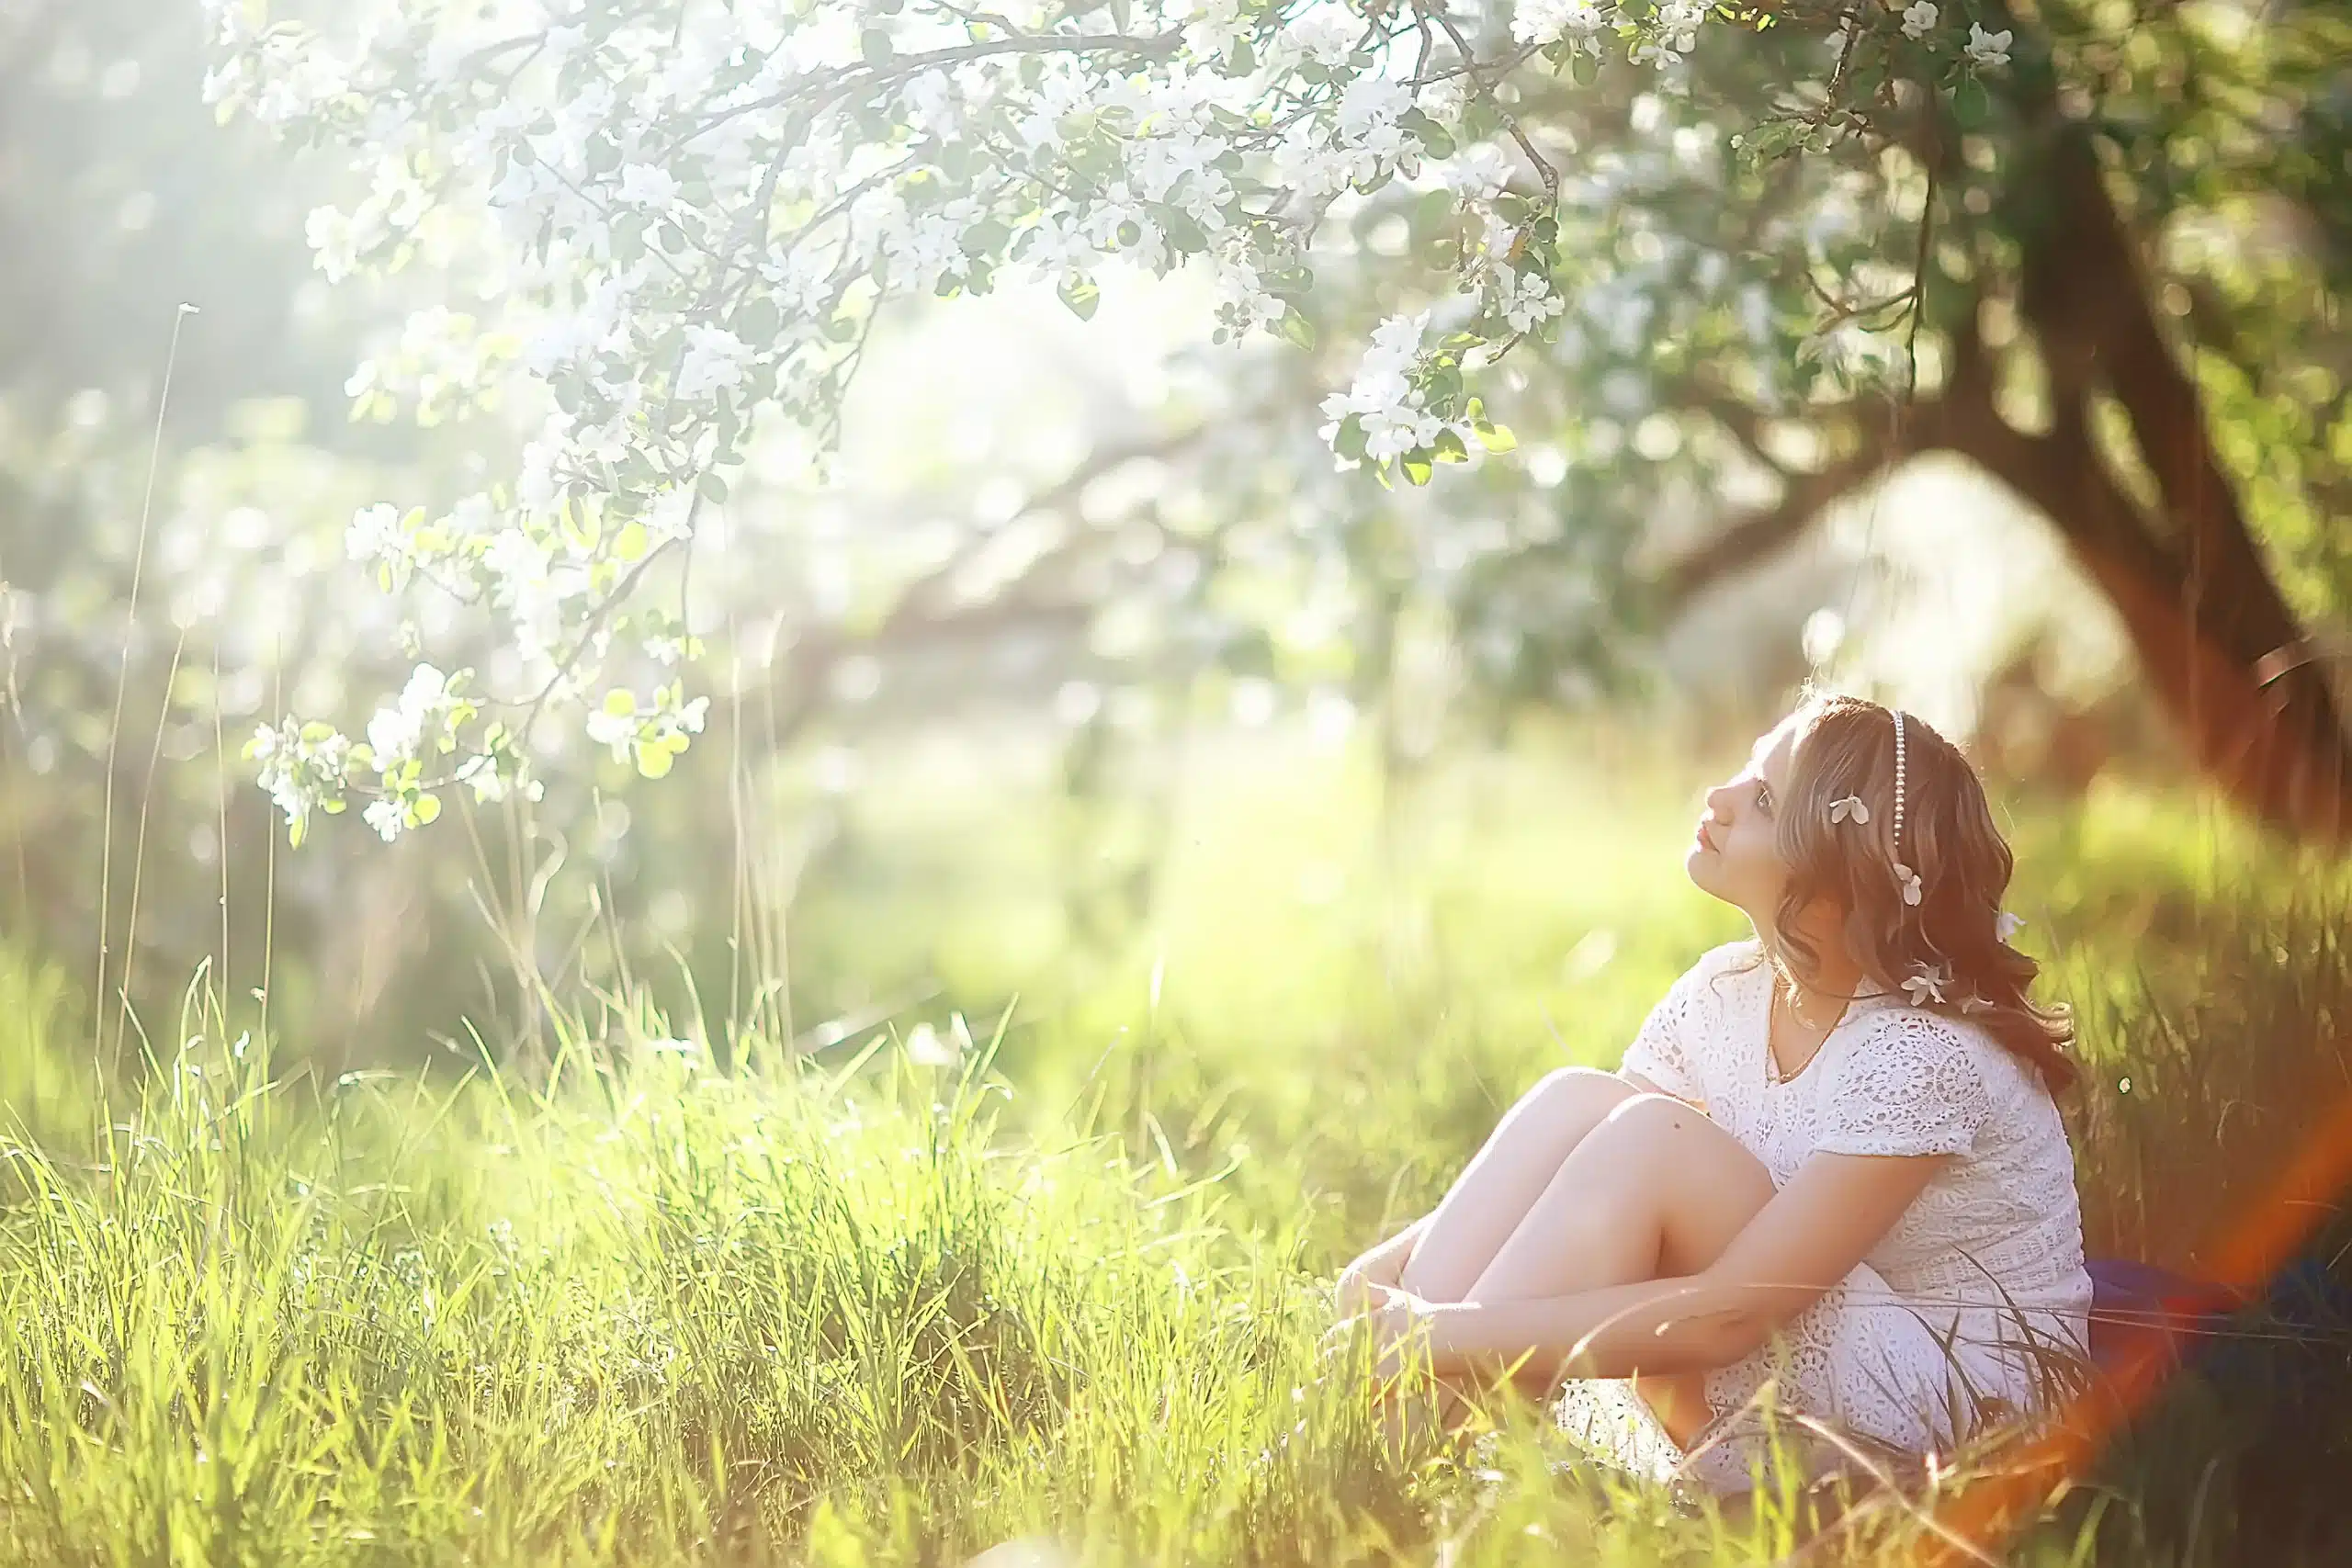 Young woman enjoys spring apple flowers in nature.